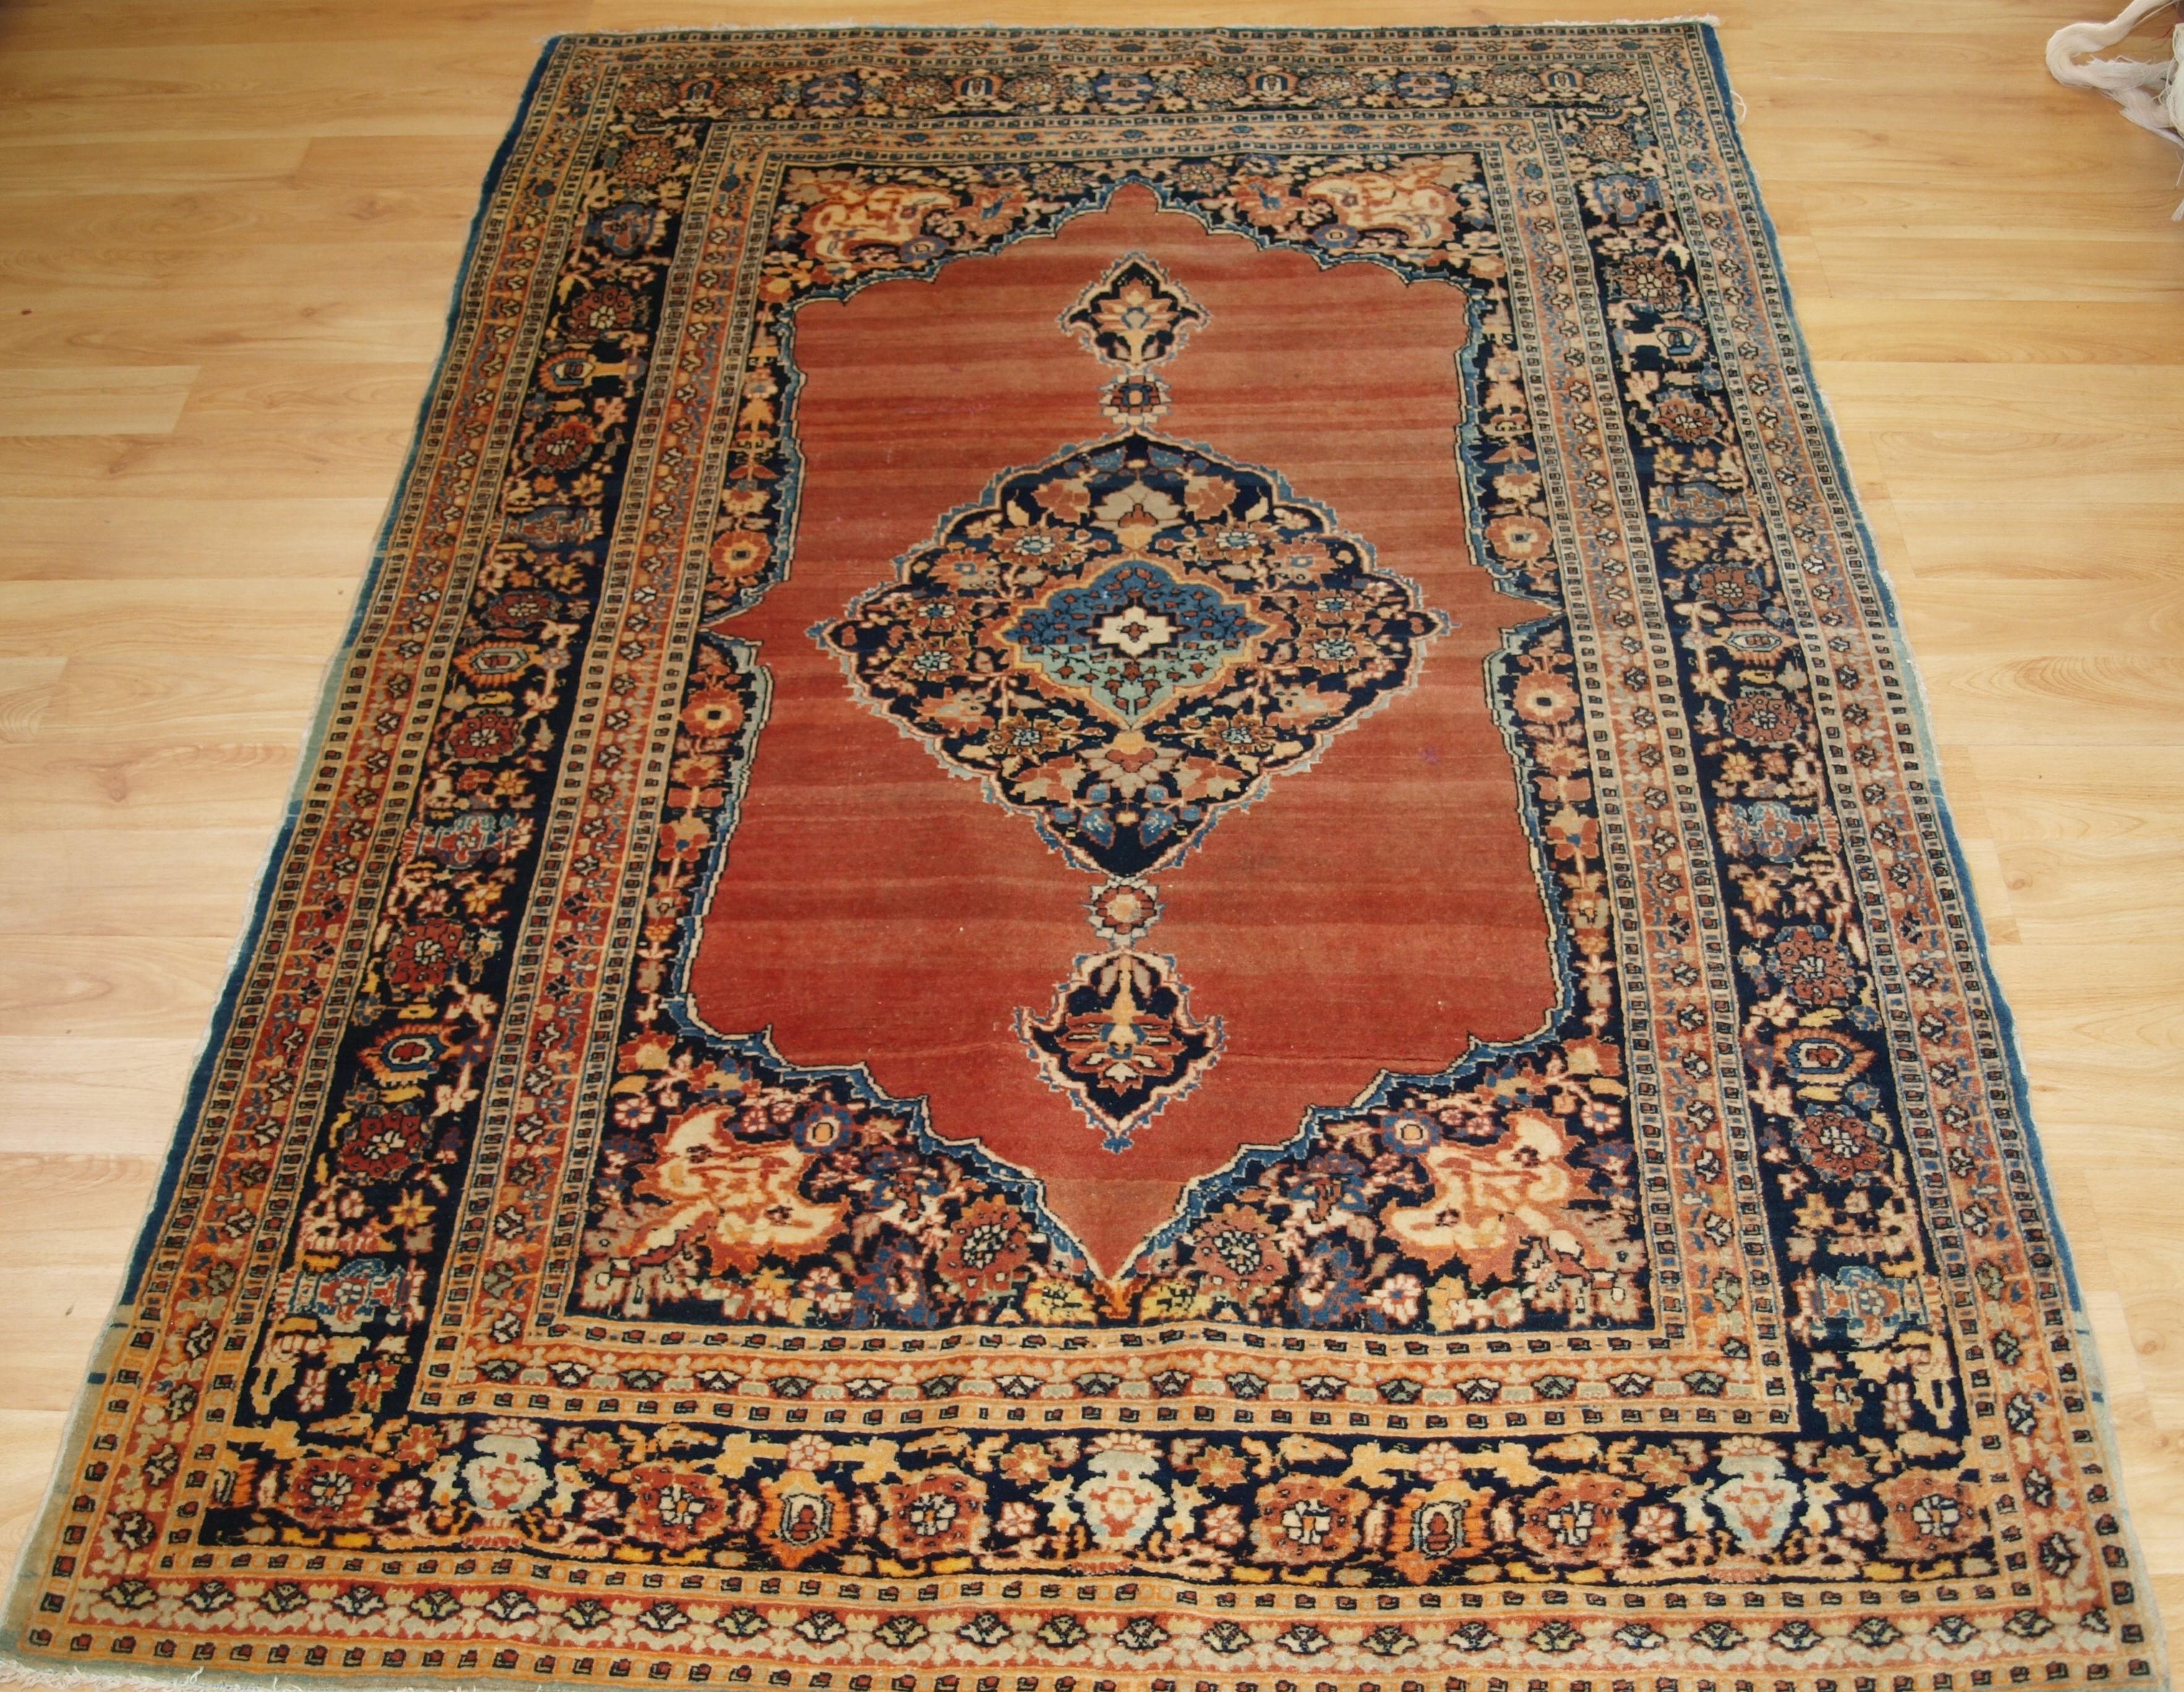 Antique Tabriz Rug Of Classic Design With A Central Medallion